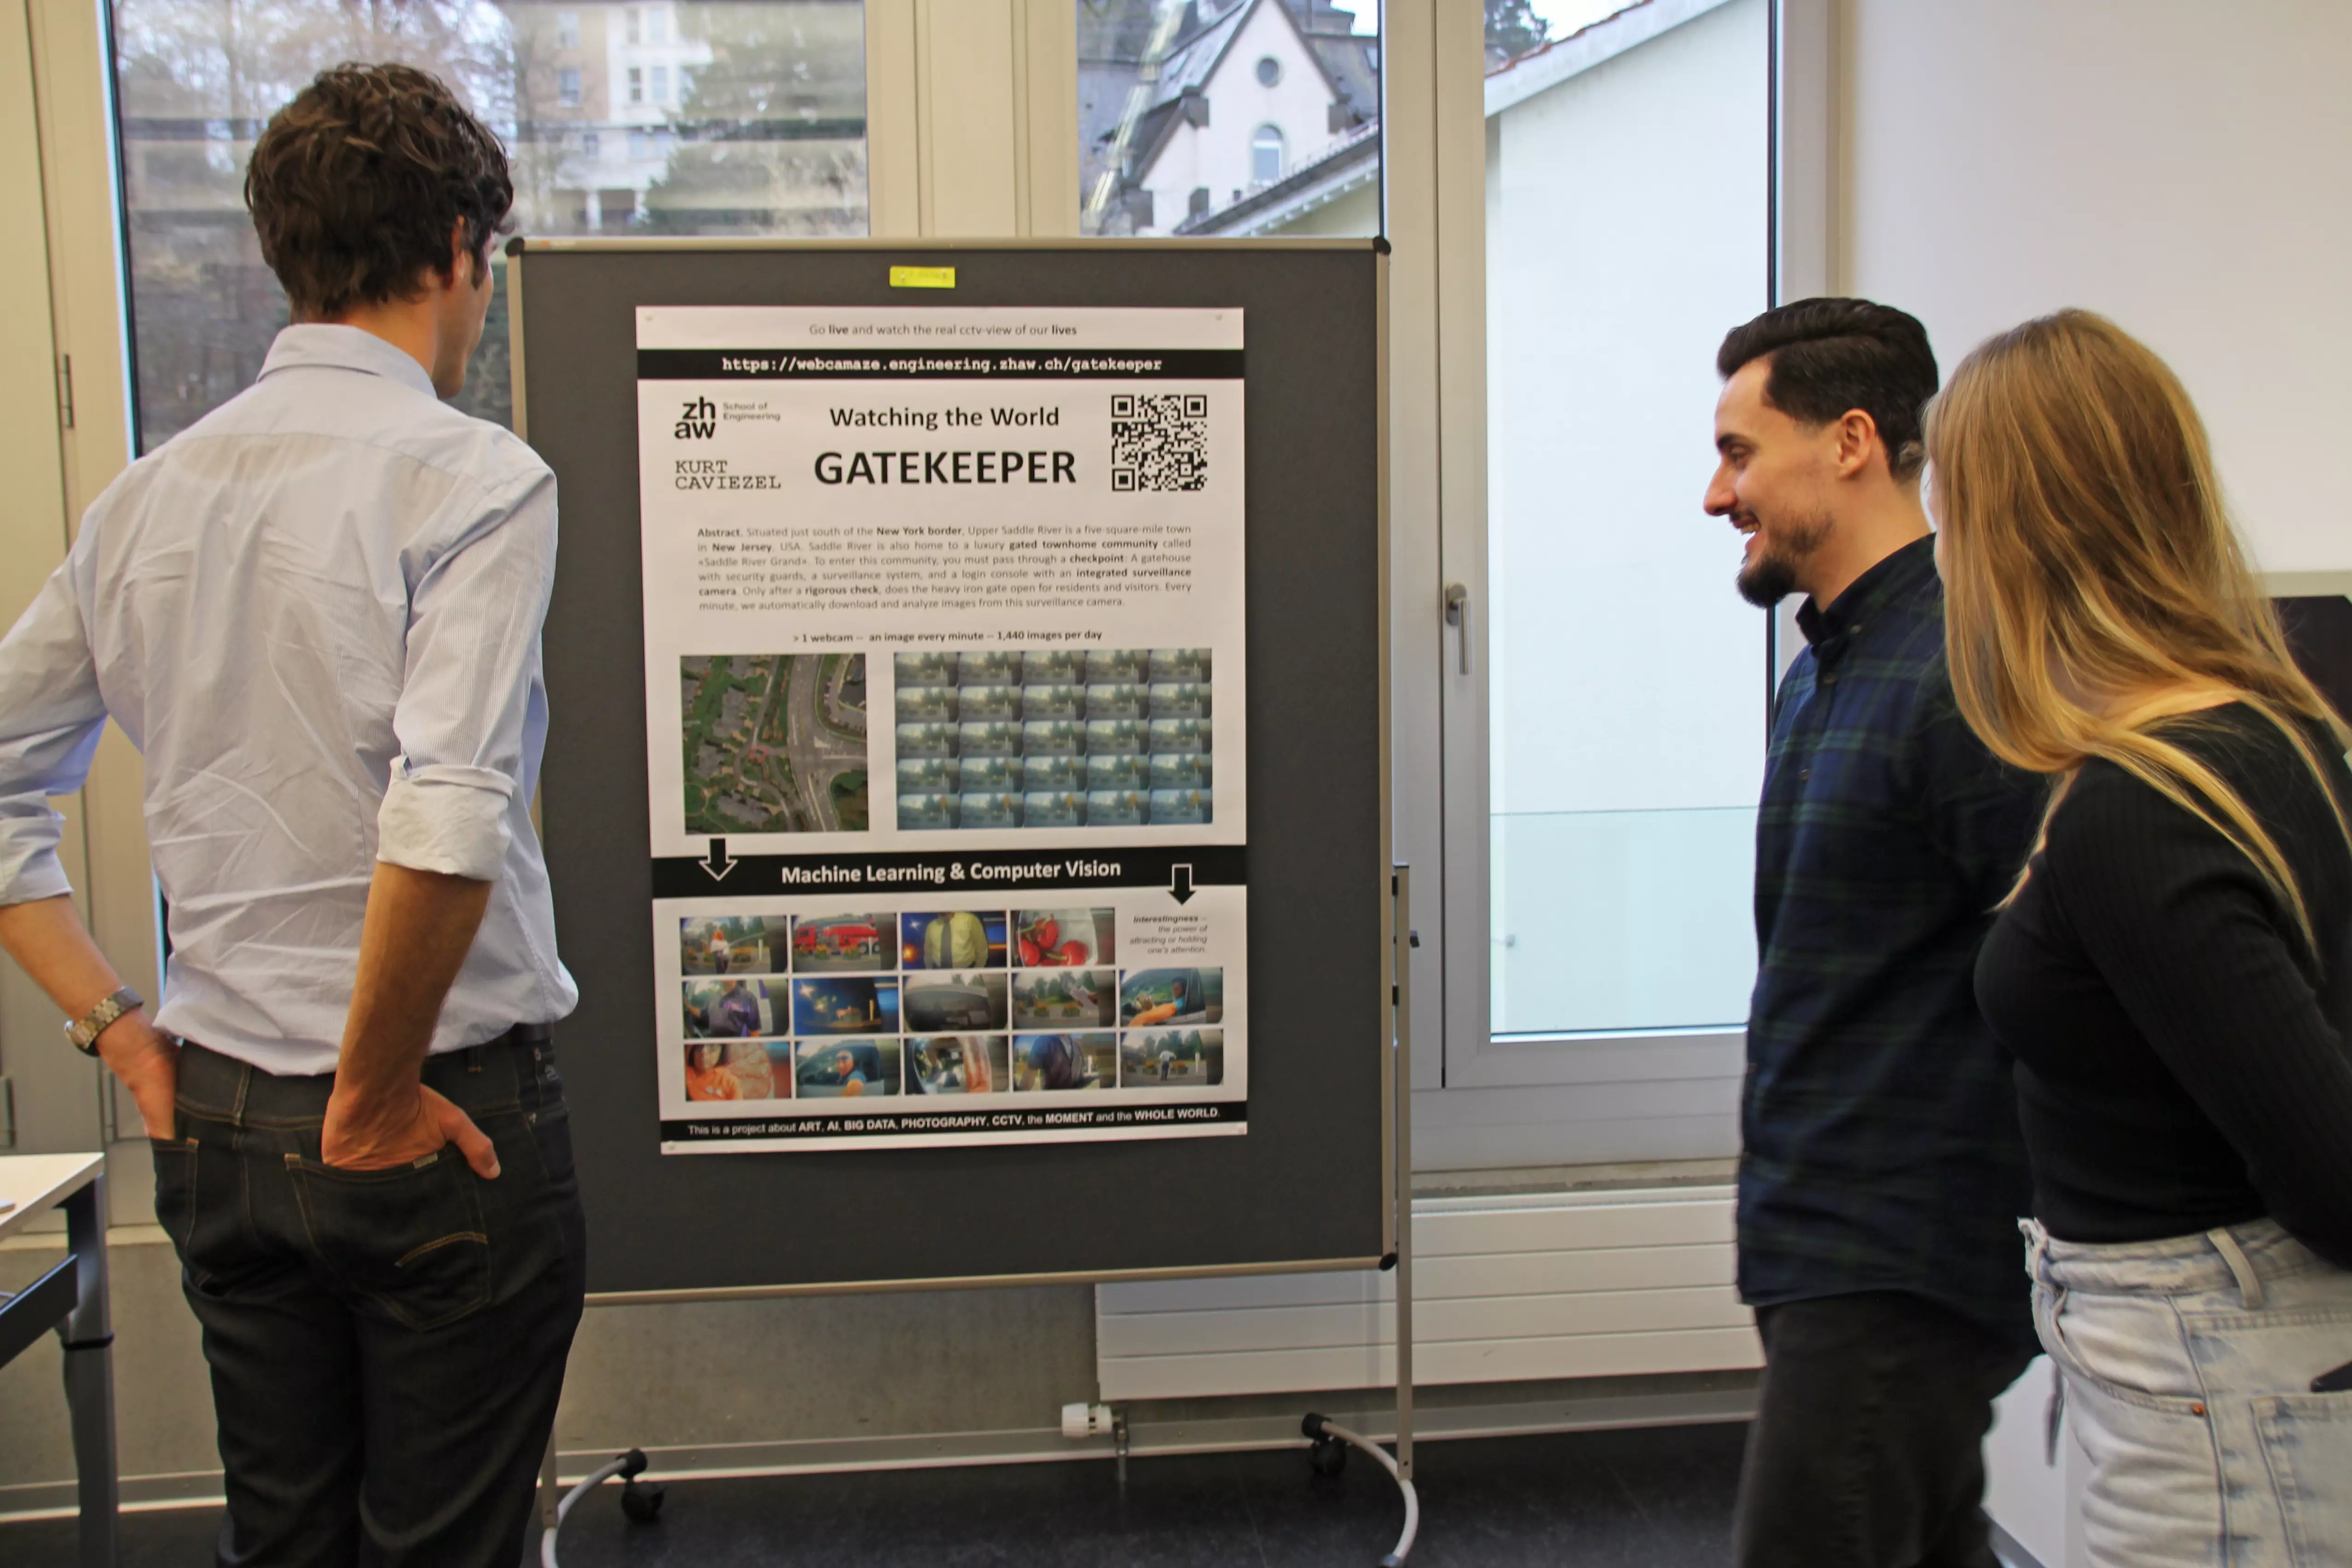 Poster presentation of the project "Watching the World 2.0"